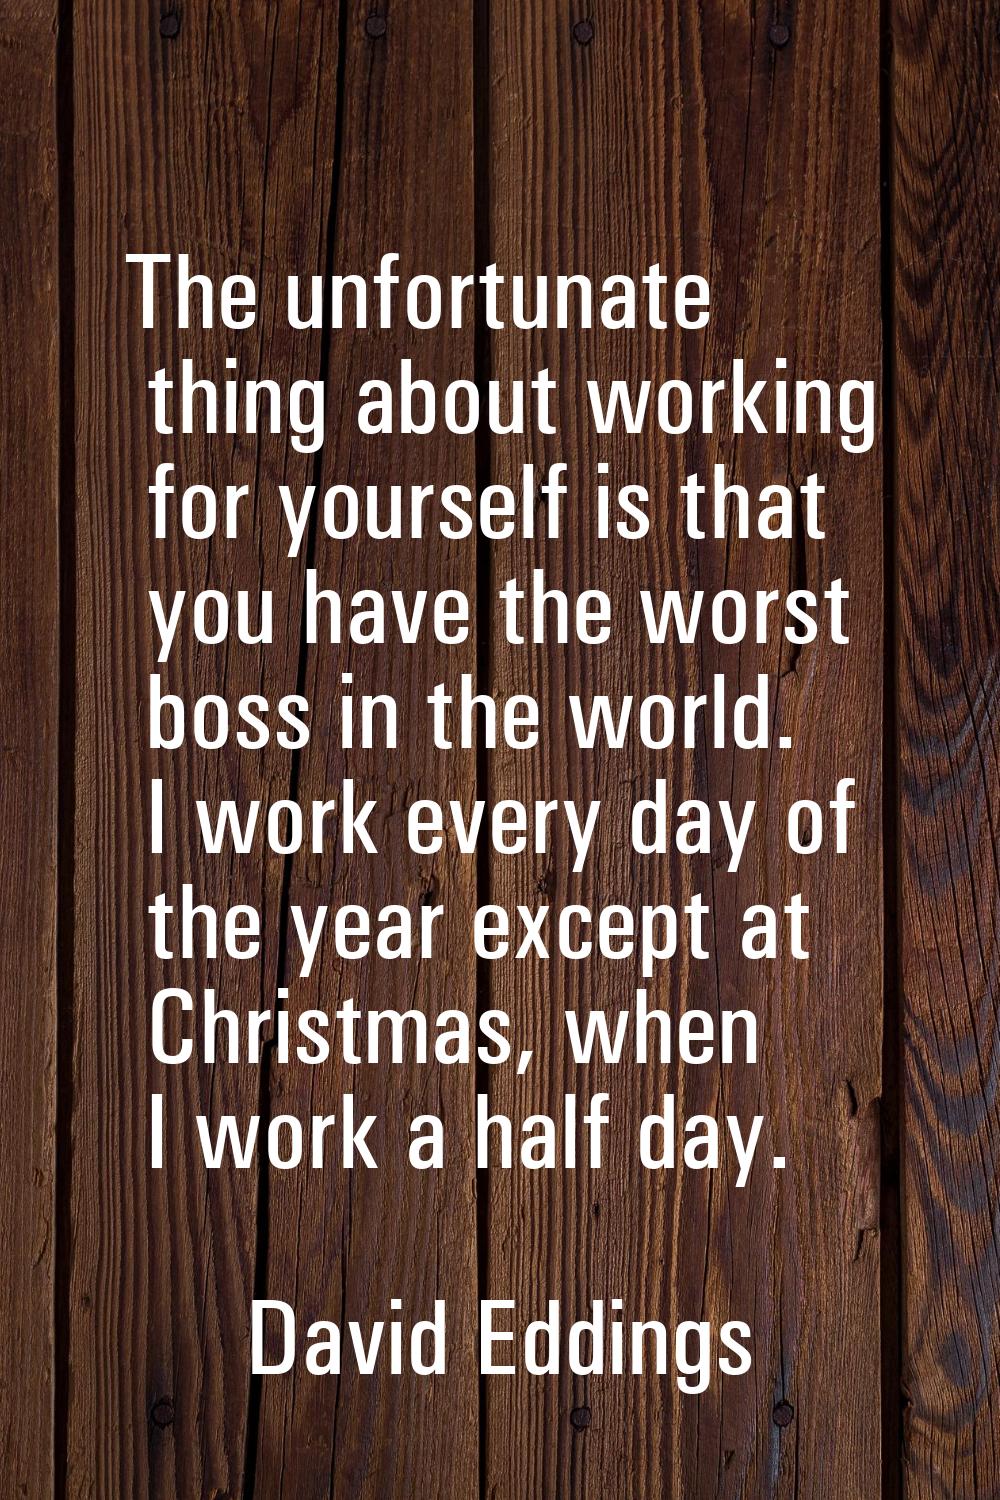 The unfortunate thing about working for yourself is that you have the worst boss in the world. I wo